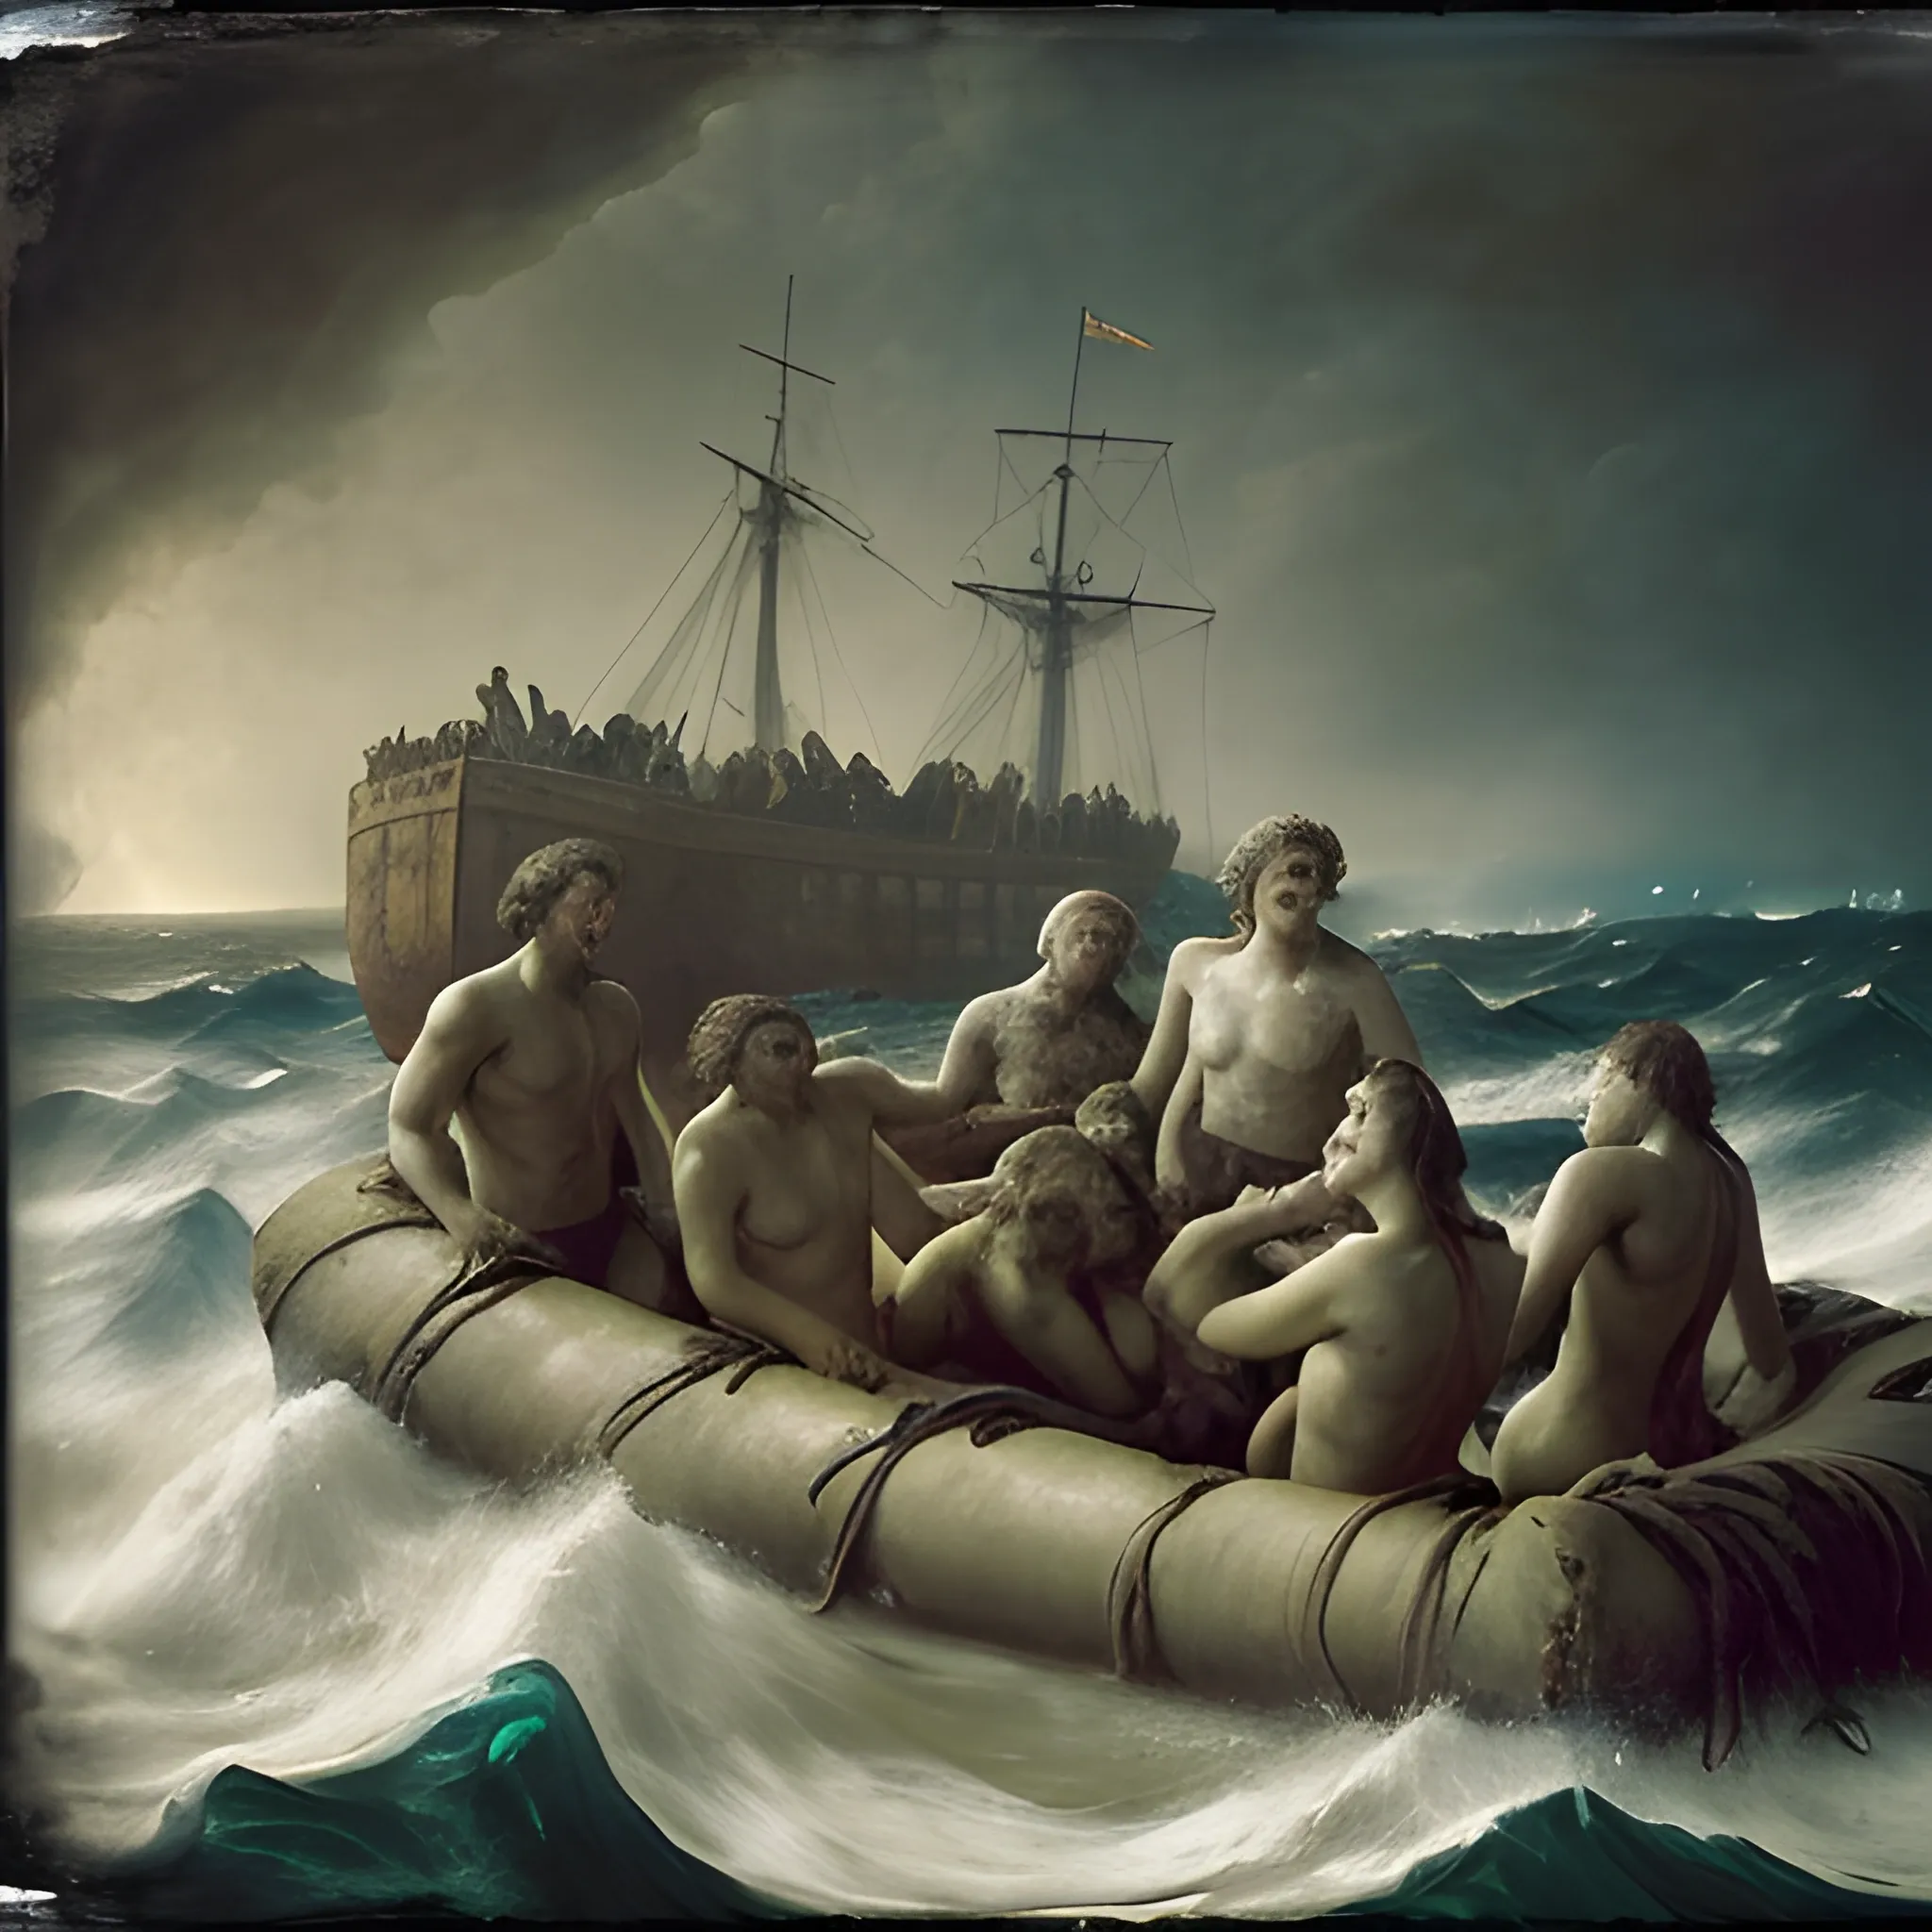 create a reproduction of "The Raft of the Medusa" by Théodore Géricault.+ Create a scene from a shipwreck, with a group of people struggling to survive at sea after the shipwreck. The scene exudes anxiety, despair, and human endurance in the face of disaster.
With detailed realism,  portray  the survivors with expressive faces, intense colors, and cinematic composition. The bodies of the castaways are presented brightly against the dark environment of the sea, creating a contrast that enhances the dramatic character of the work.
 Whimsical elements, eerie atmosphere, chaotic background. Photorealism, Color Photography, Mid-20th Century-Present.